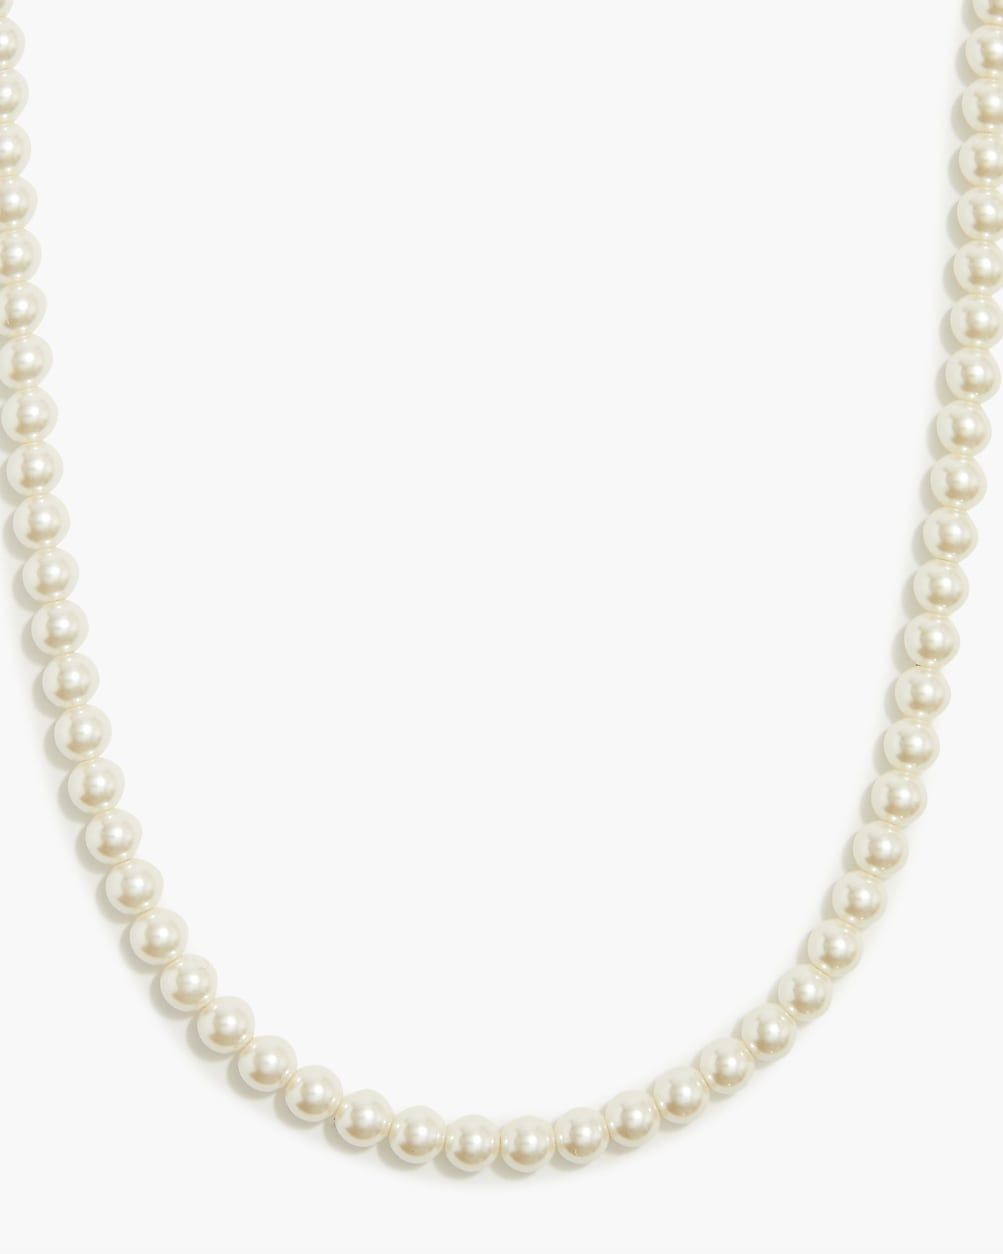 Pearl strand necklace | J.Crew Factory